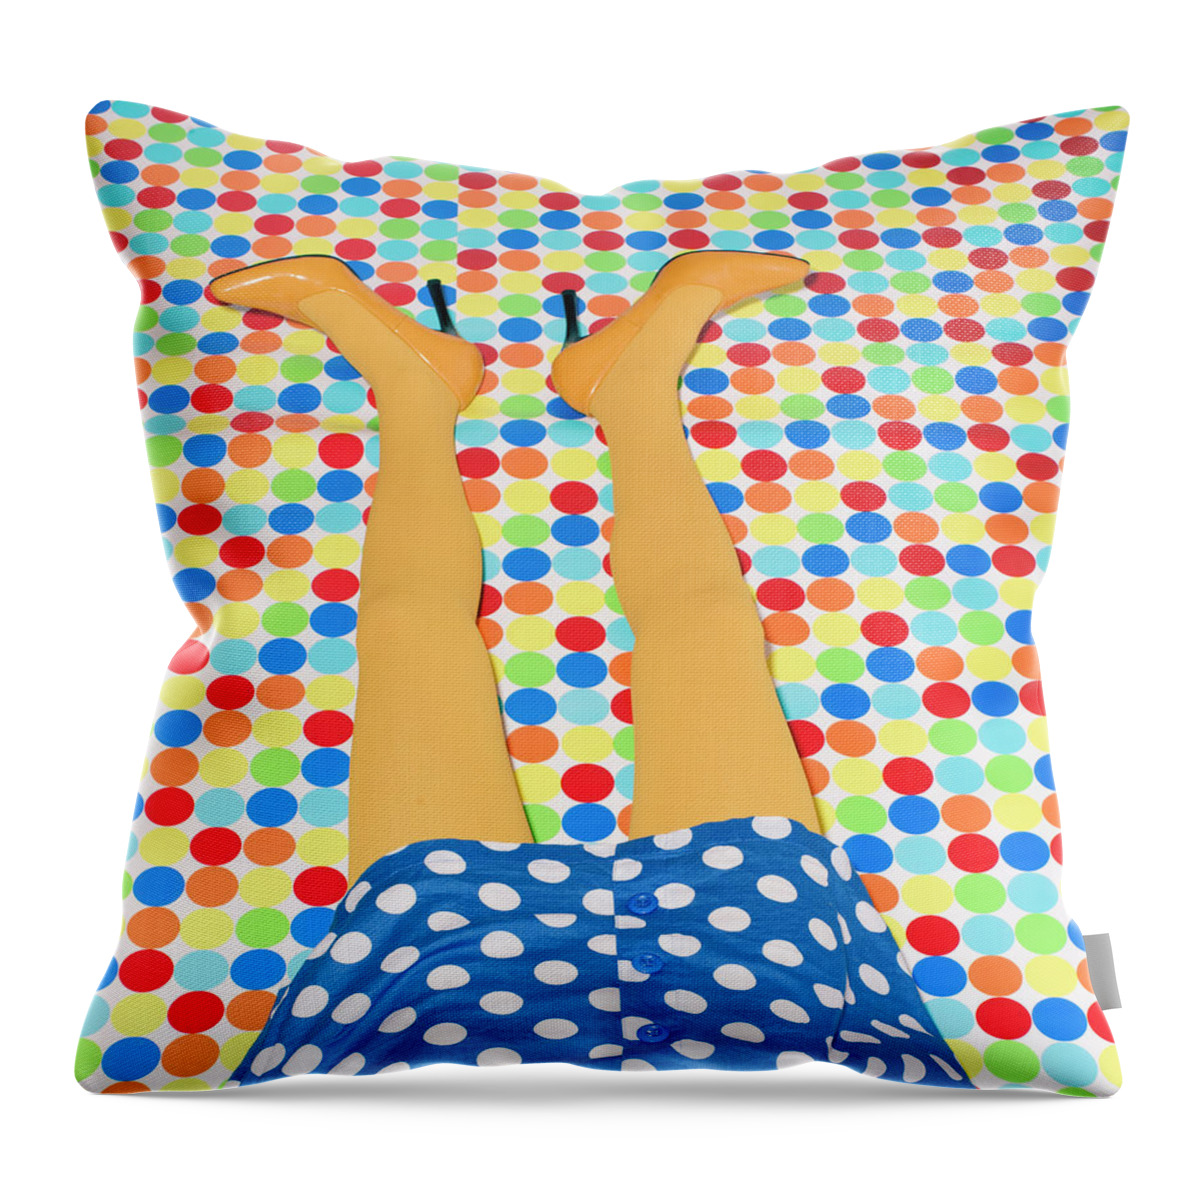 People Throw Pillow featuring the digital art Womans Yellow Legs On Polka Dot Floor by Mimi Haddon